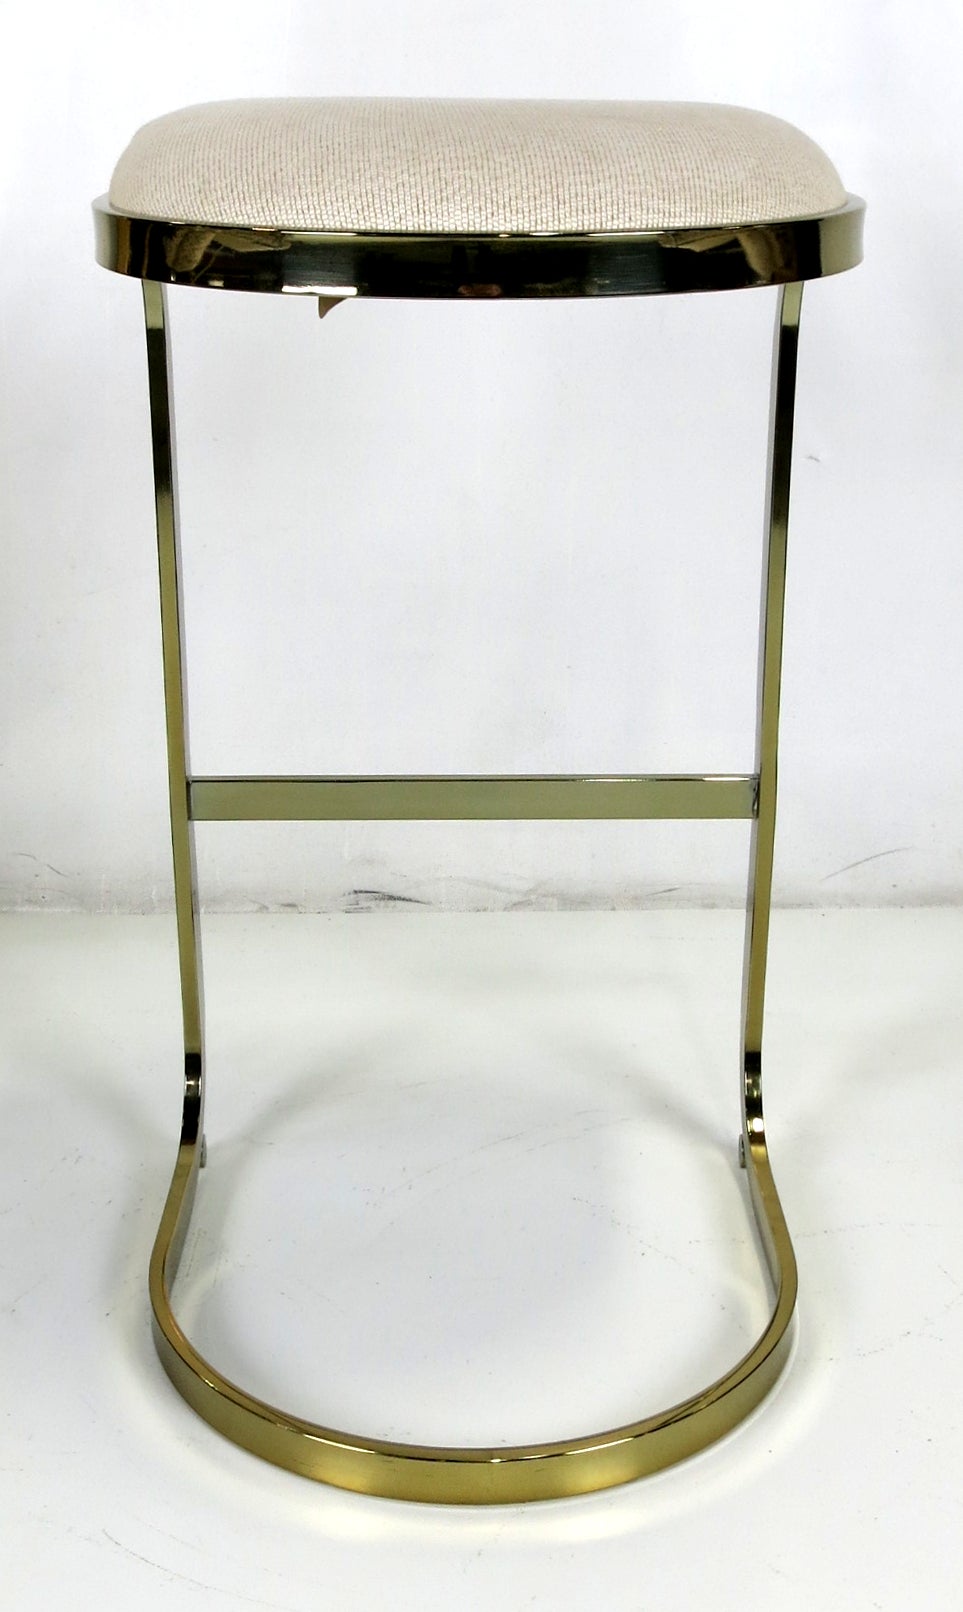 Upholstery Pair of Cantilevered Brass Barstools